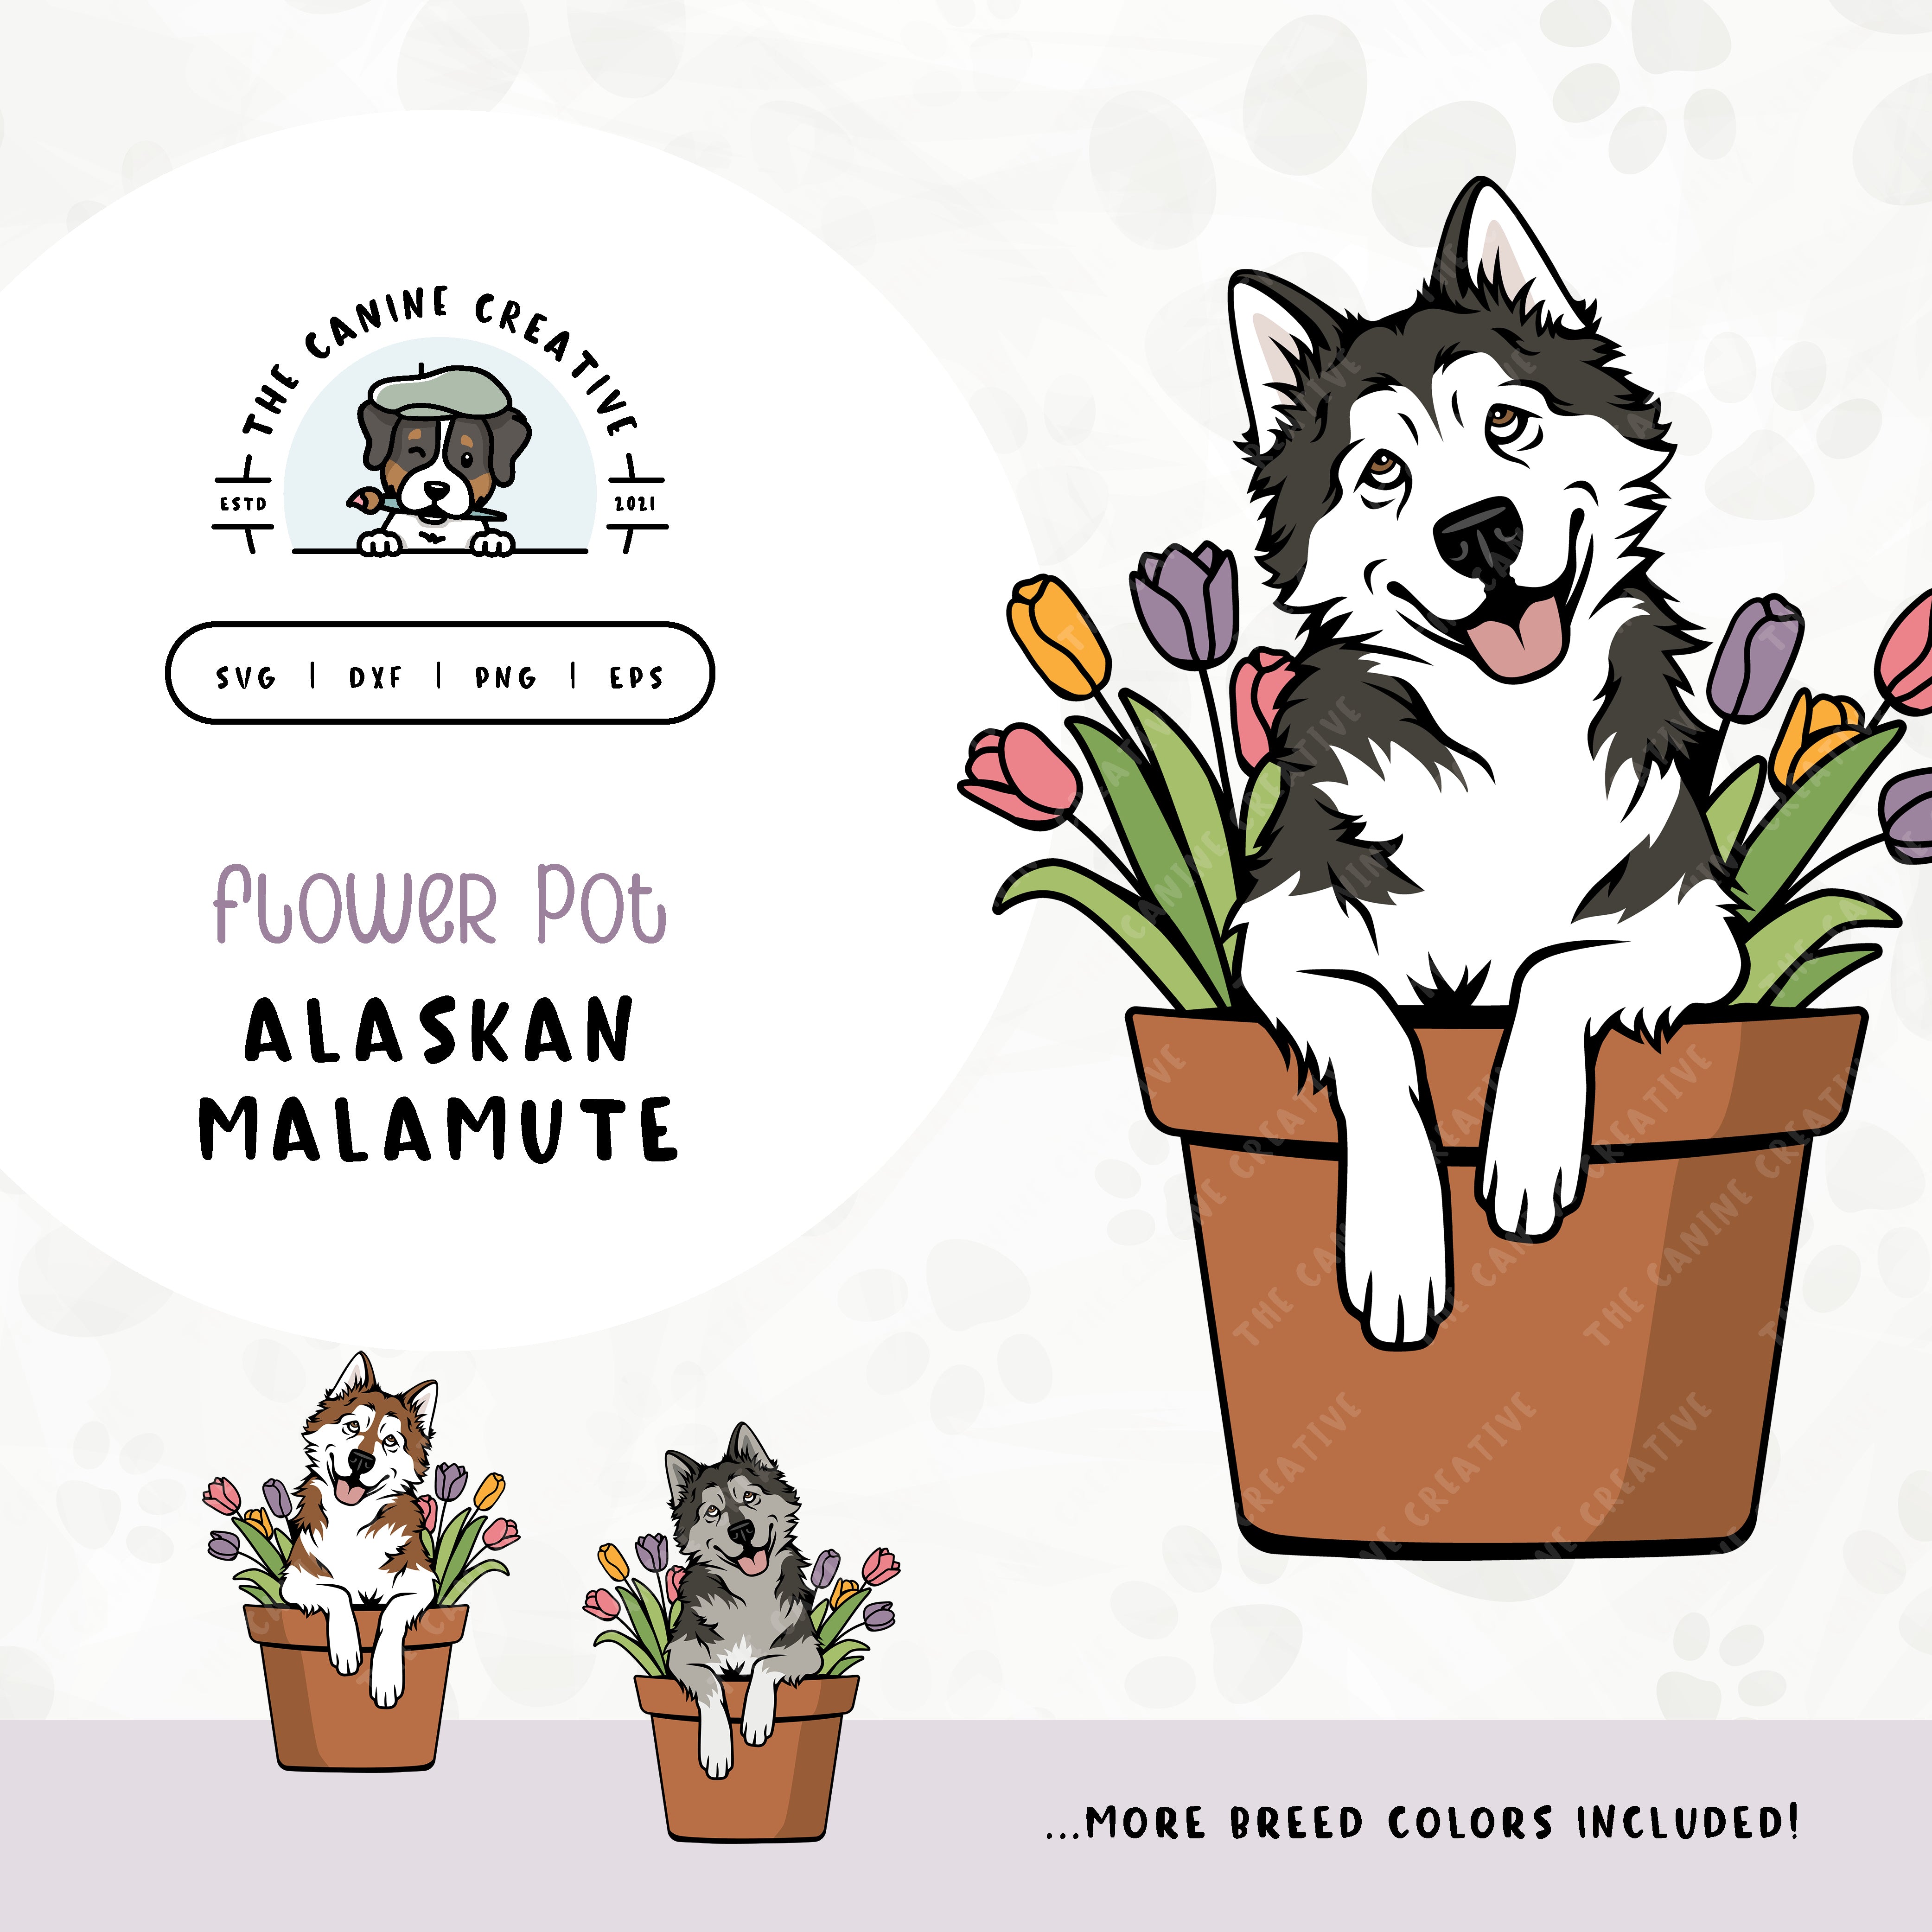 This springtime illustration features an Alaskan Malamute peeking out of a pot of vibrant tulips. File formats include: SVG, DXF, PNG, and EPS.